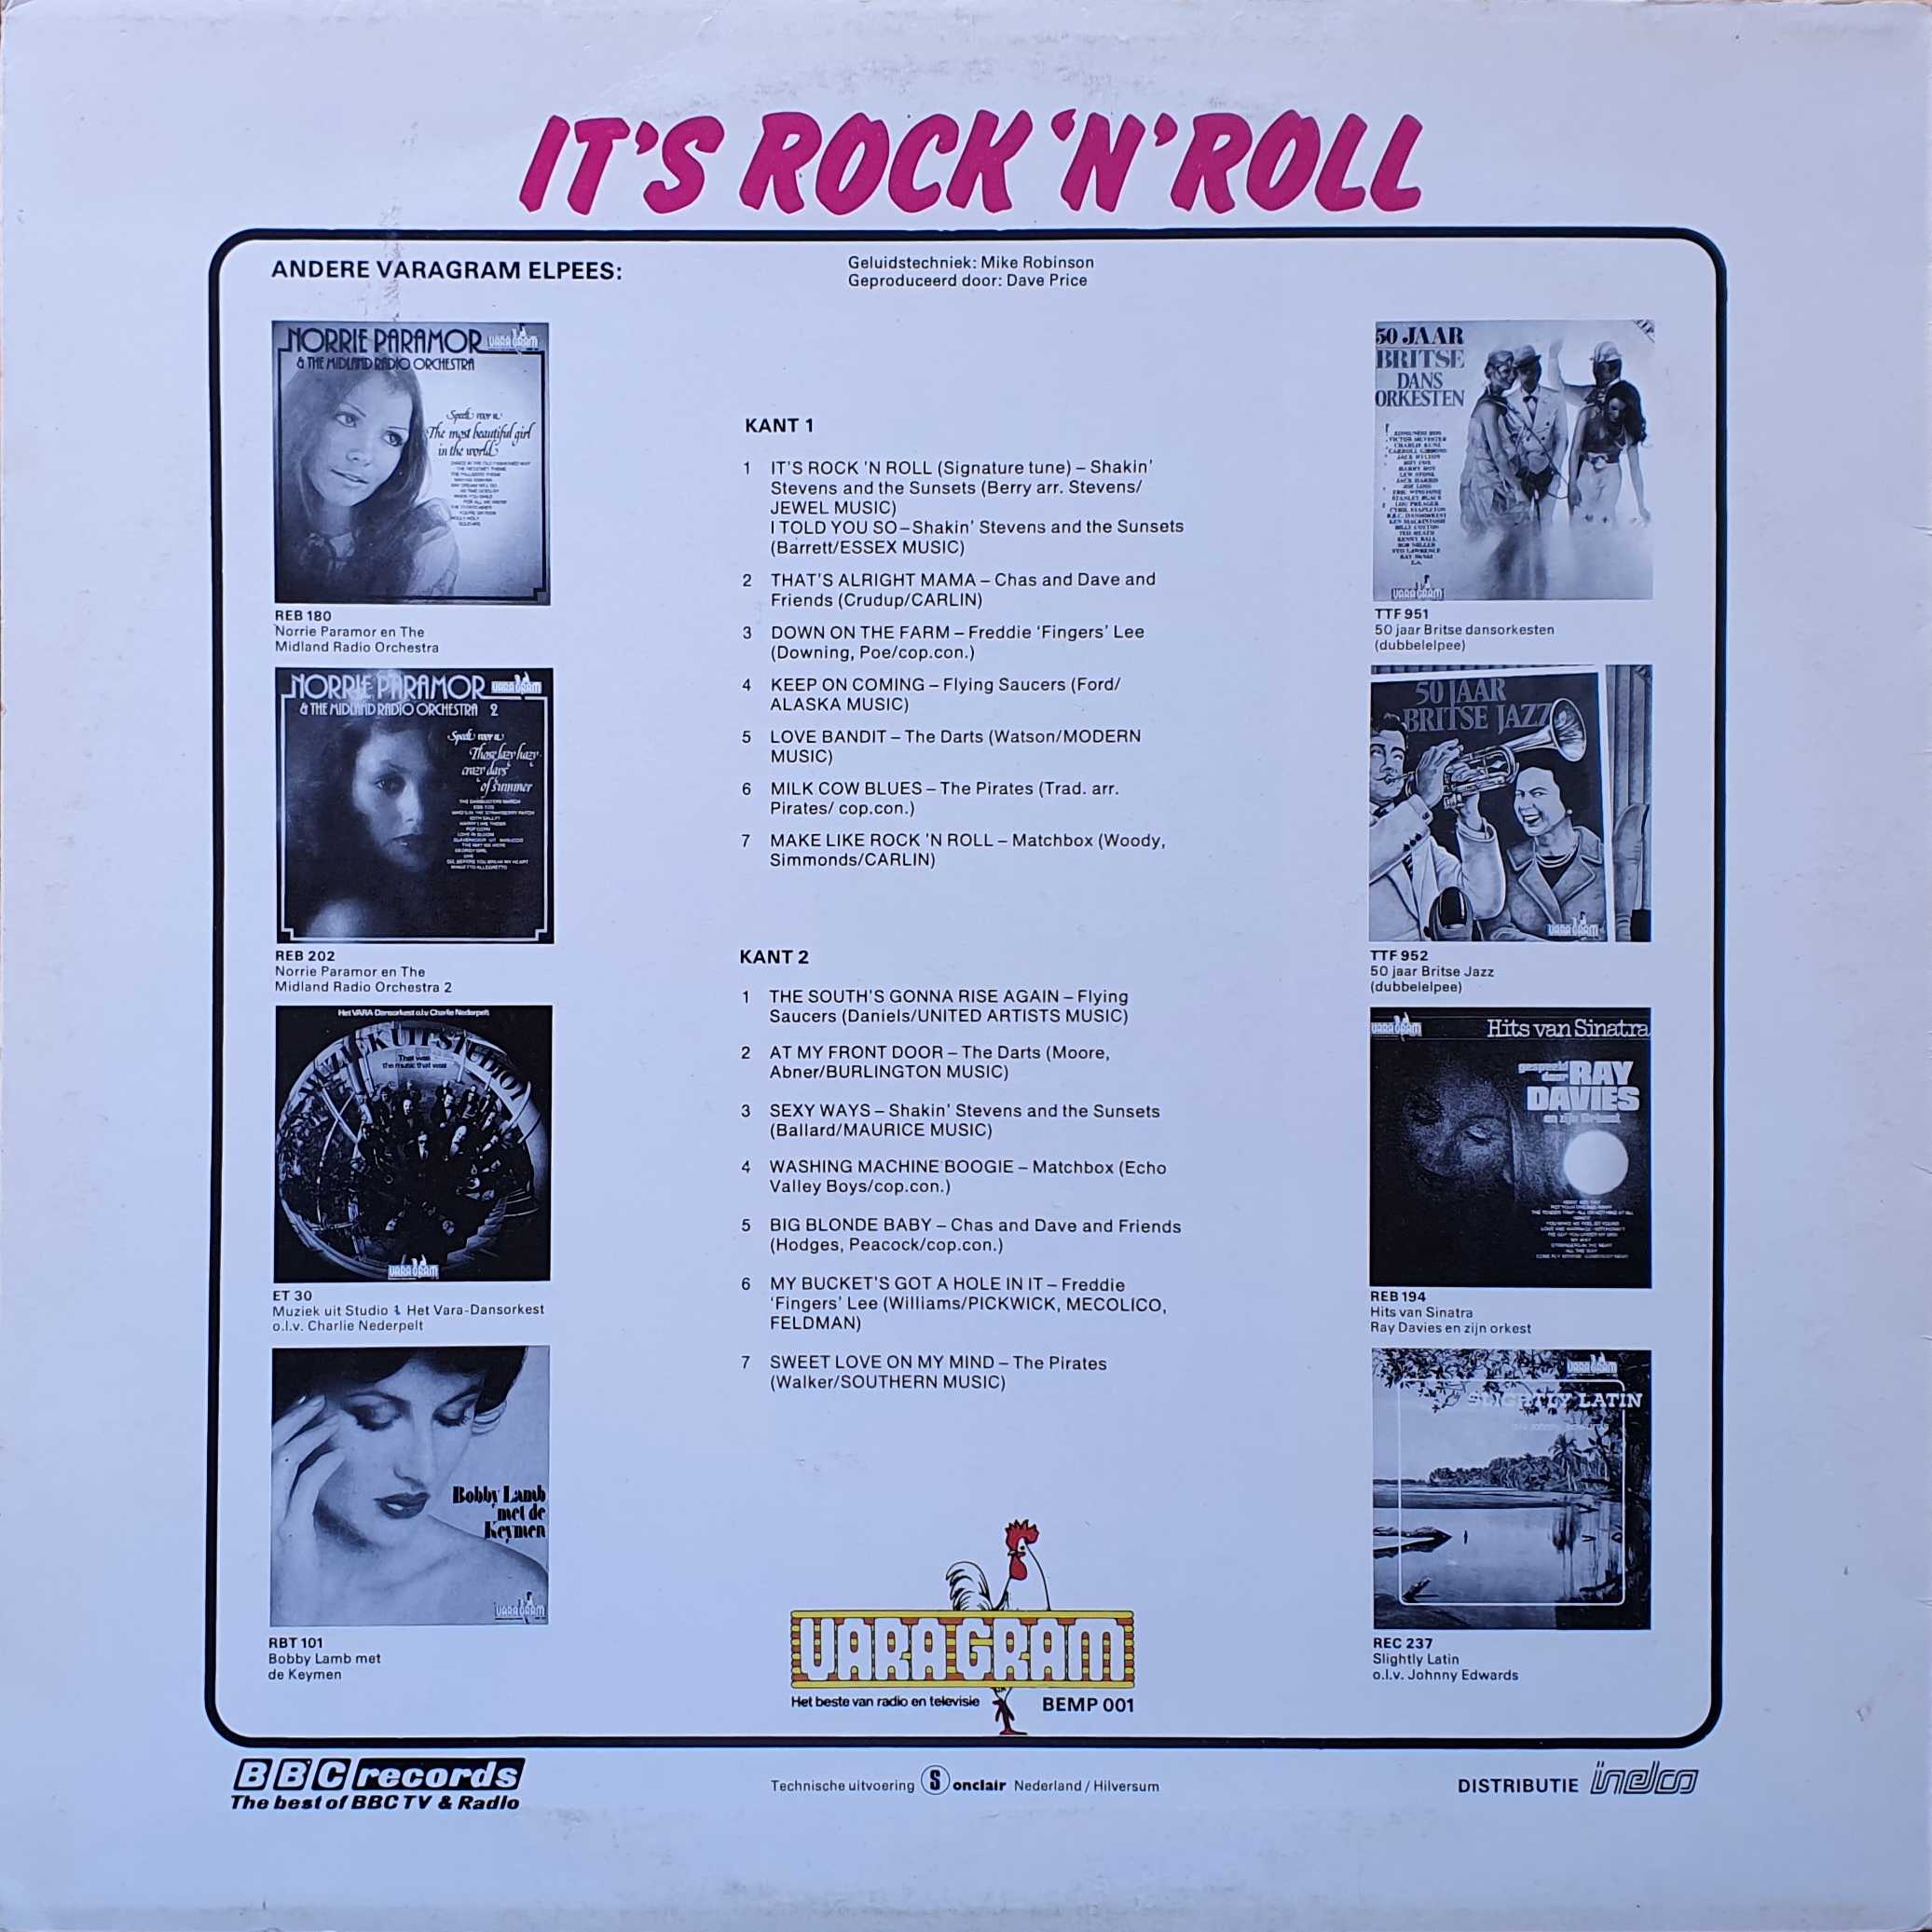 Picture of BEMP 001-iD It's rock 'n' roll by artist Various from the BBC records and Tapes library